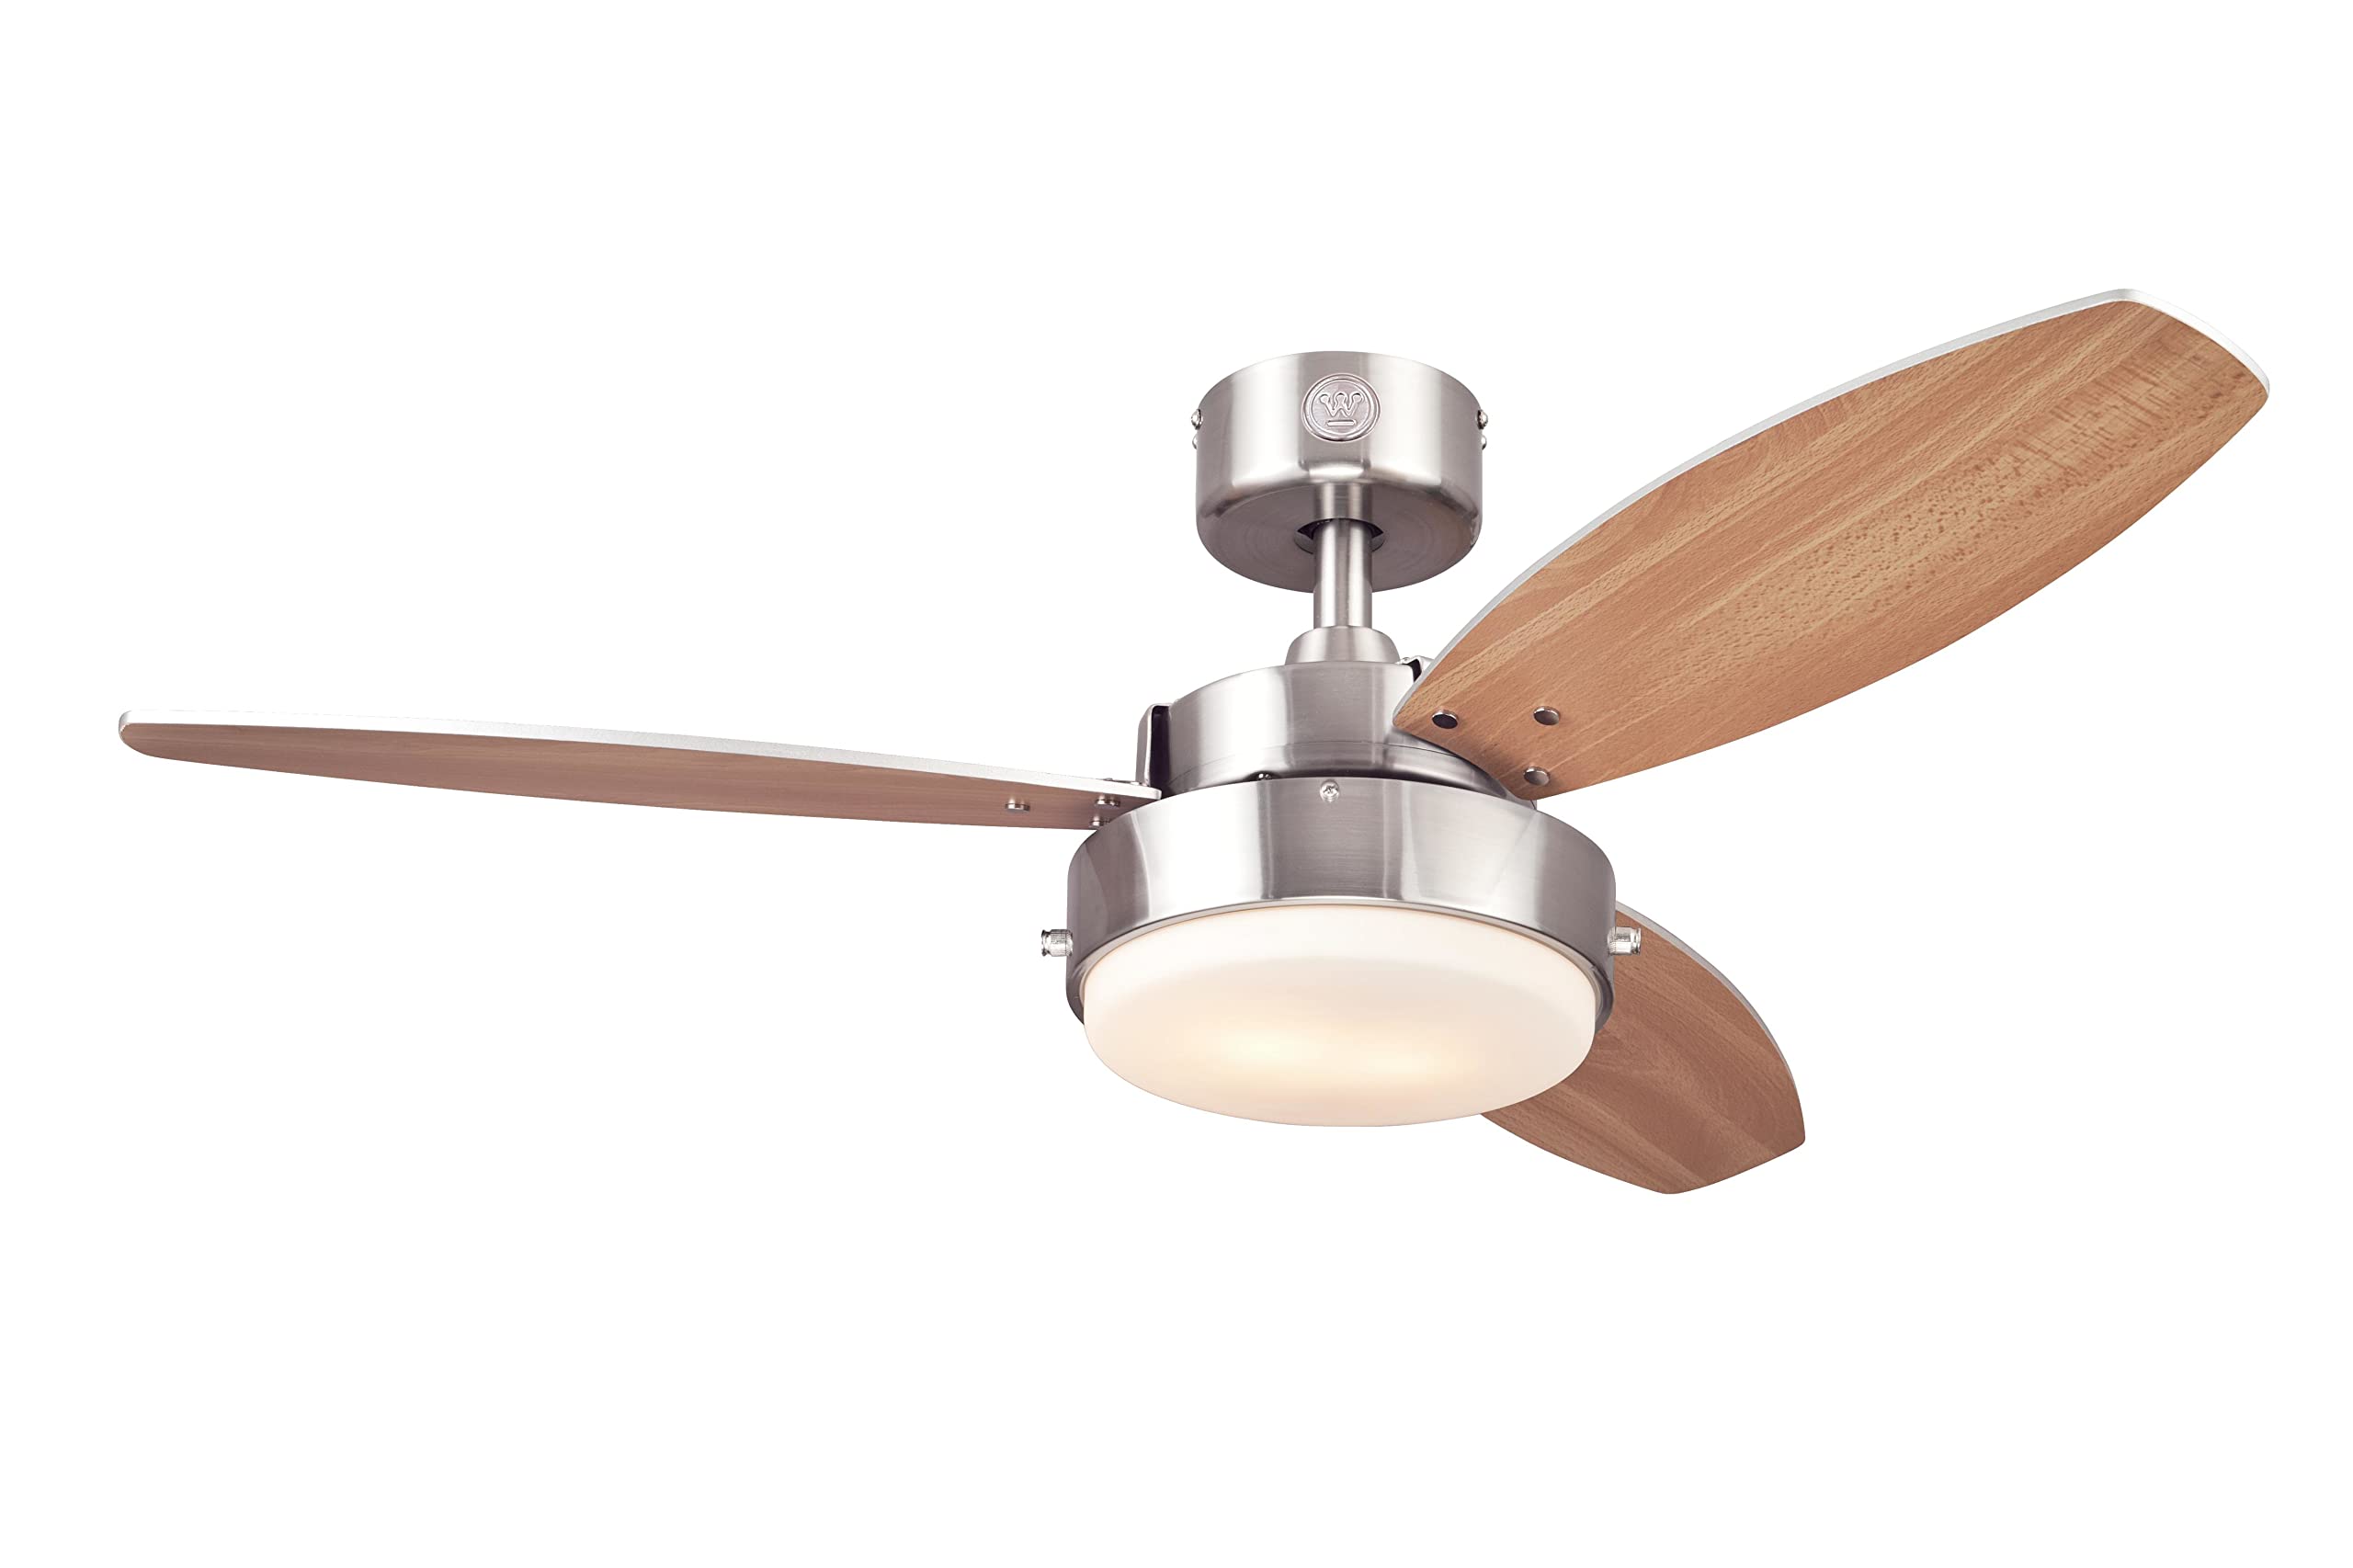 Westinghouse Lighting 7221600 Alloy Ceiling Fan, 42 Inch, Brushed Nickel